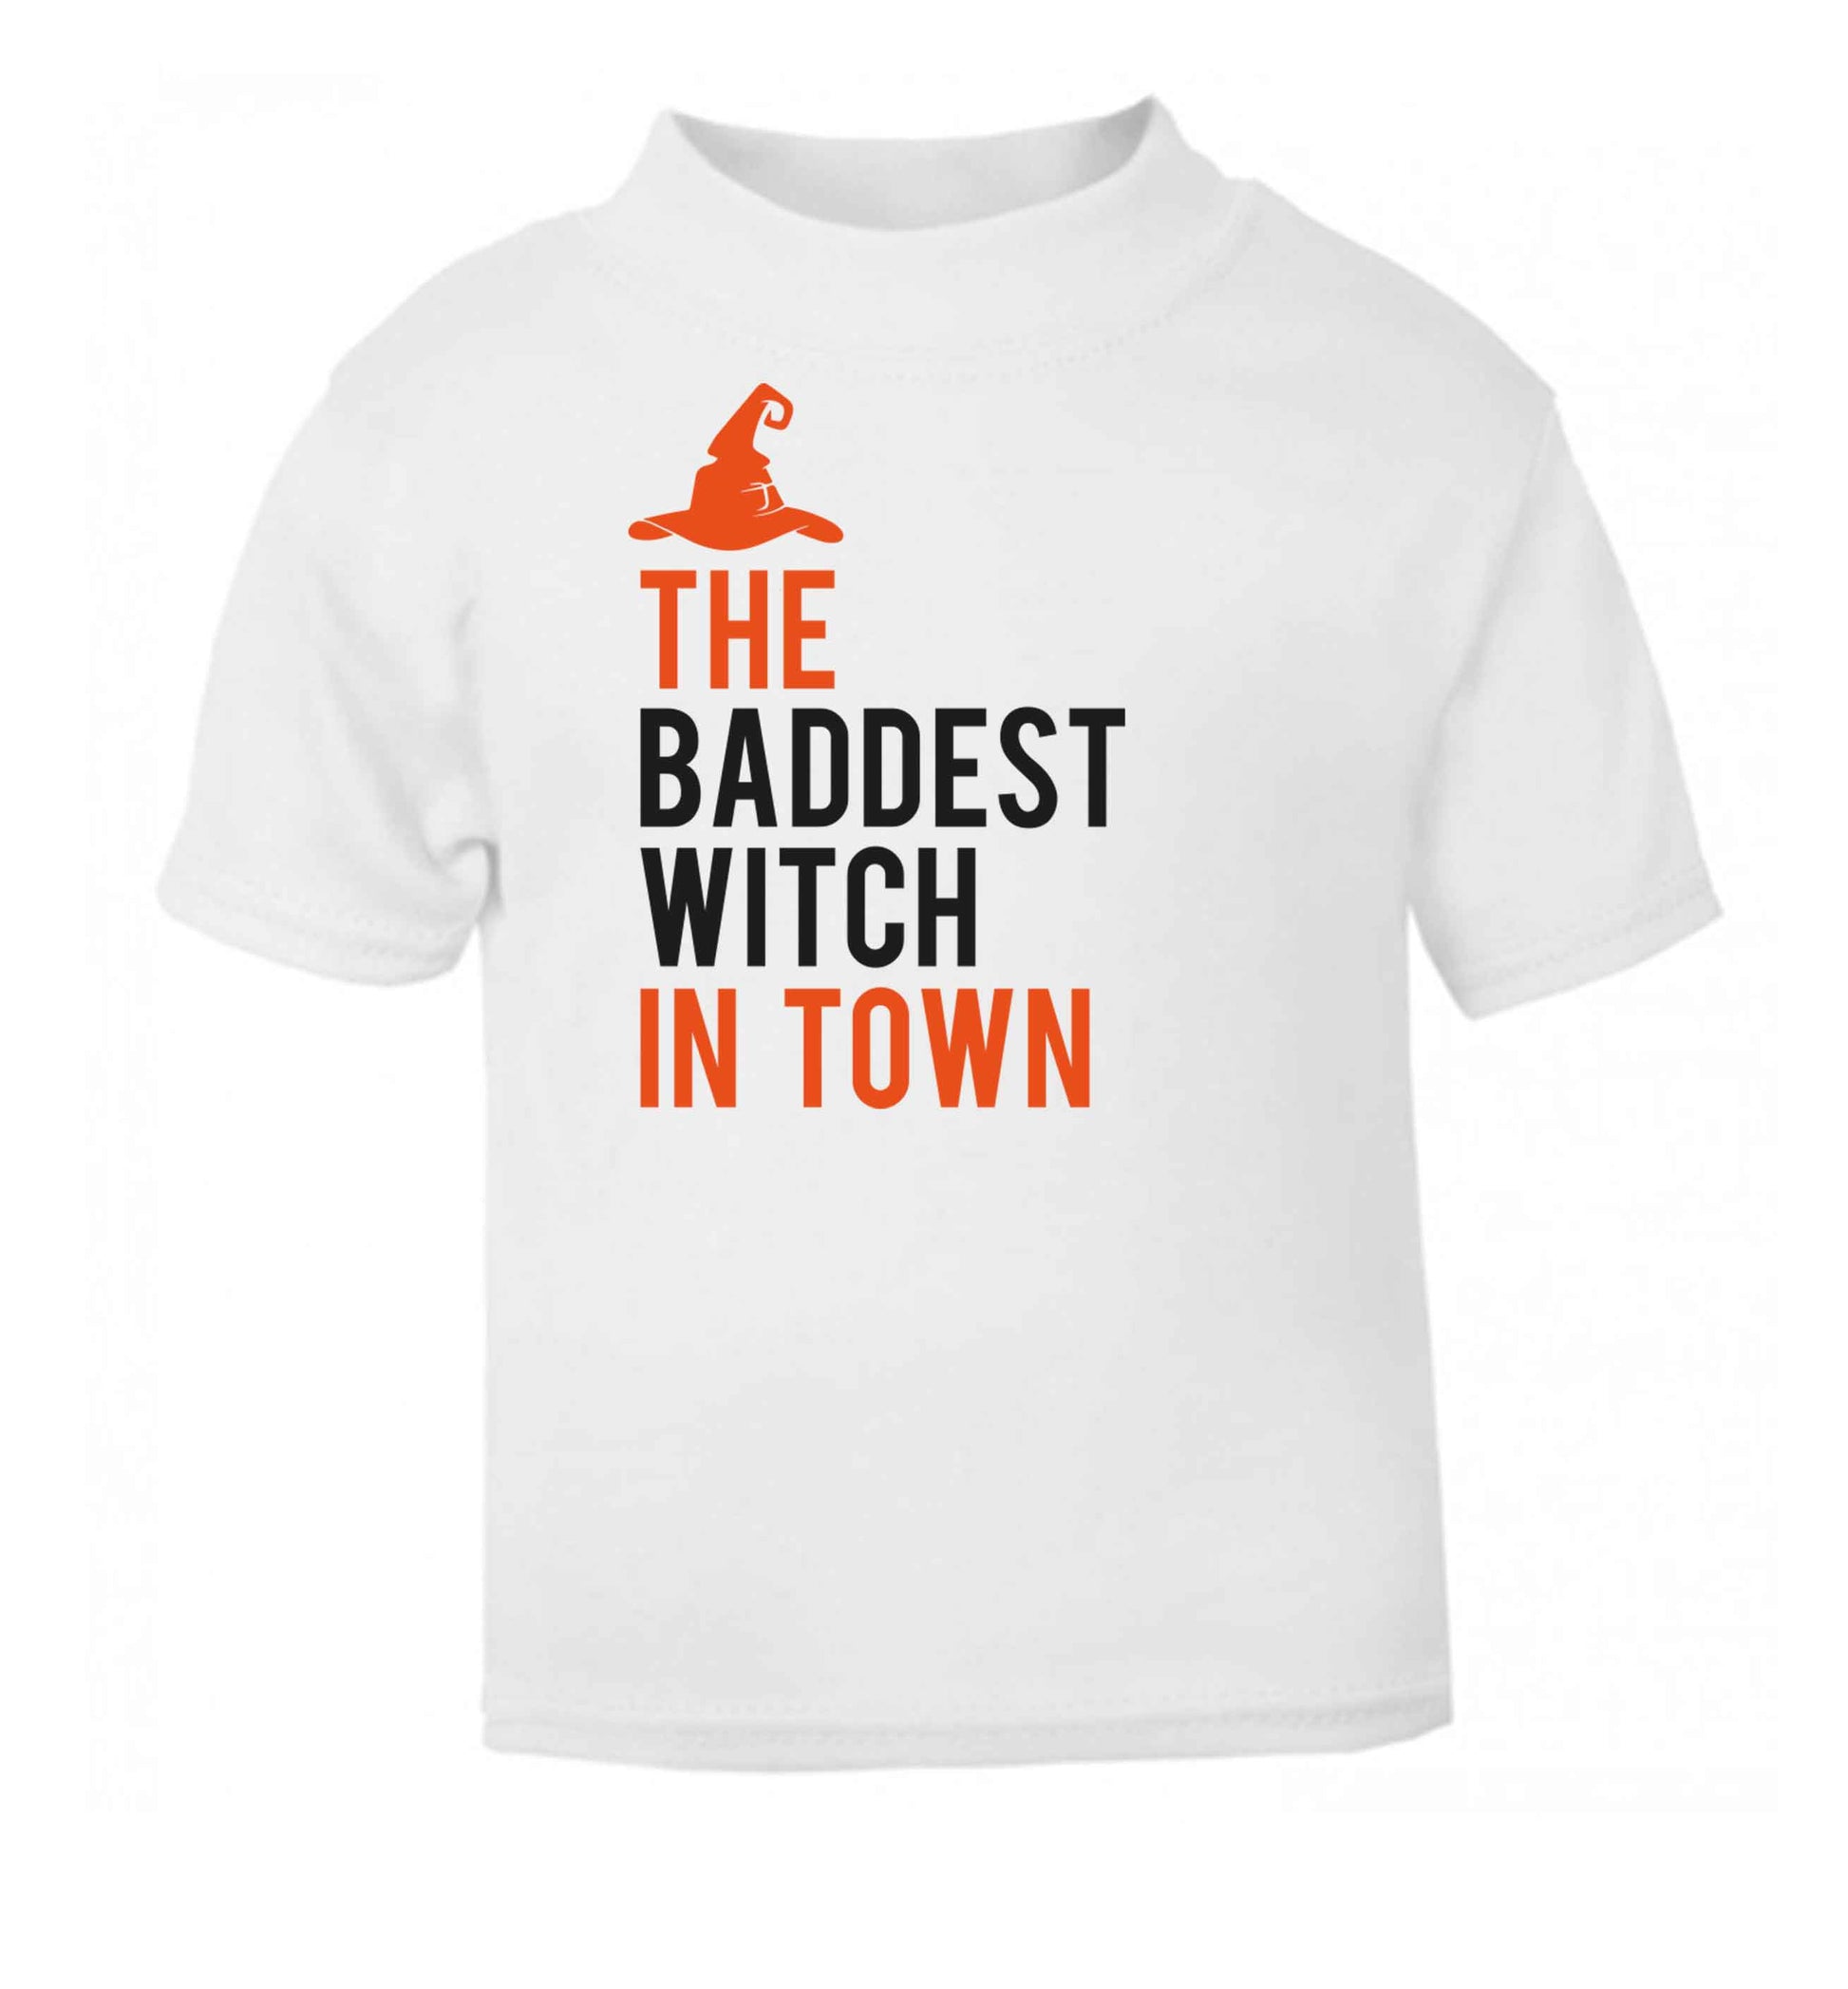 Badest witch in town white baby toddler Tshirt 2 Years